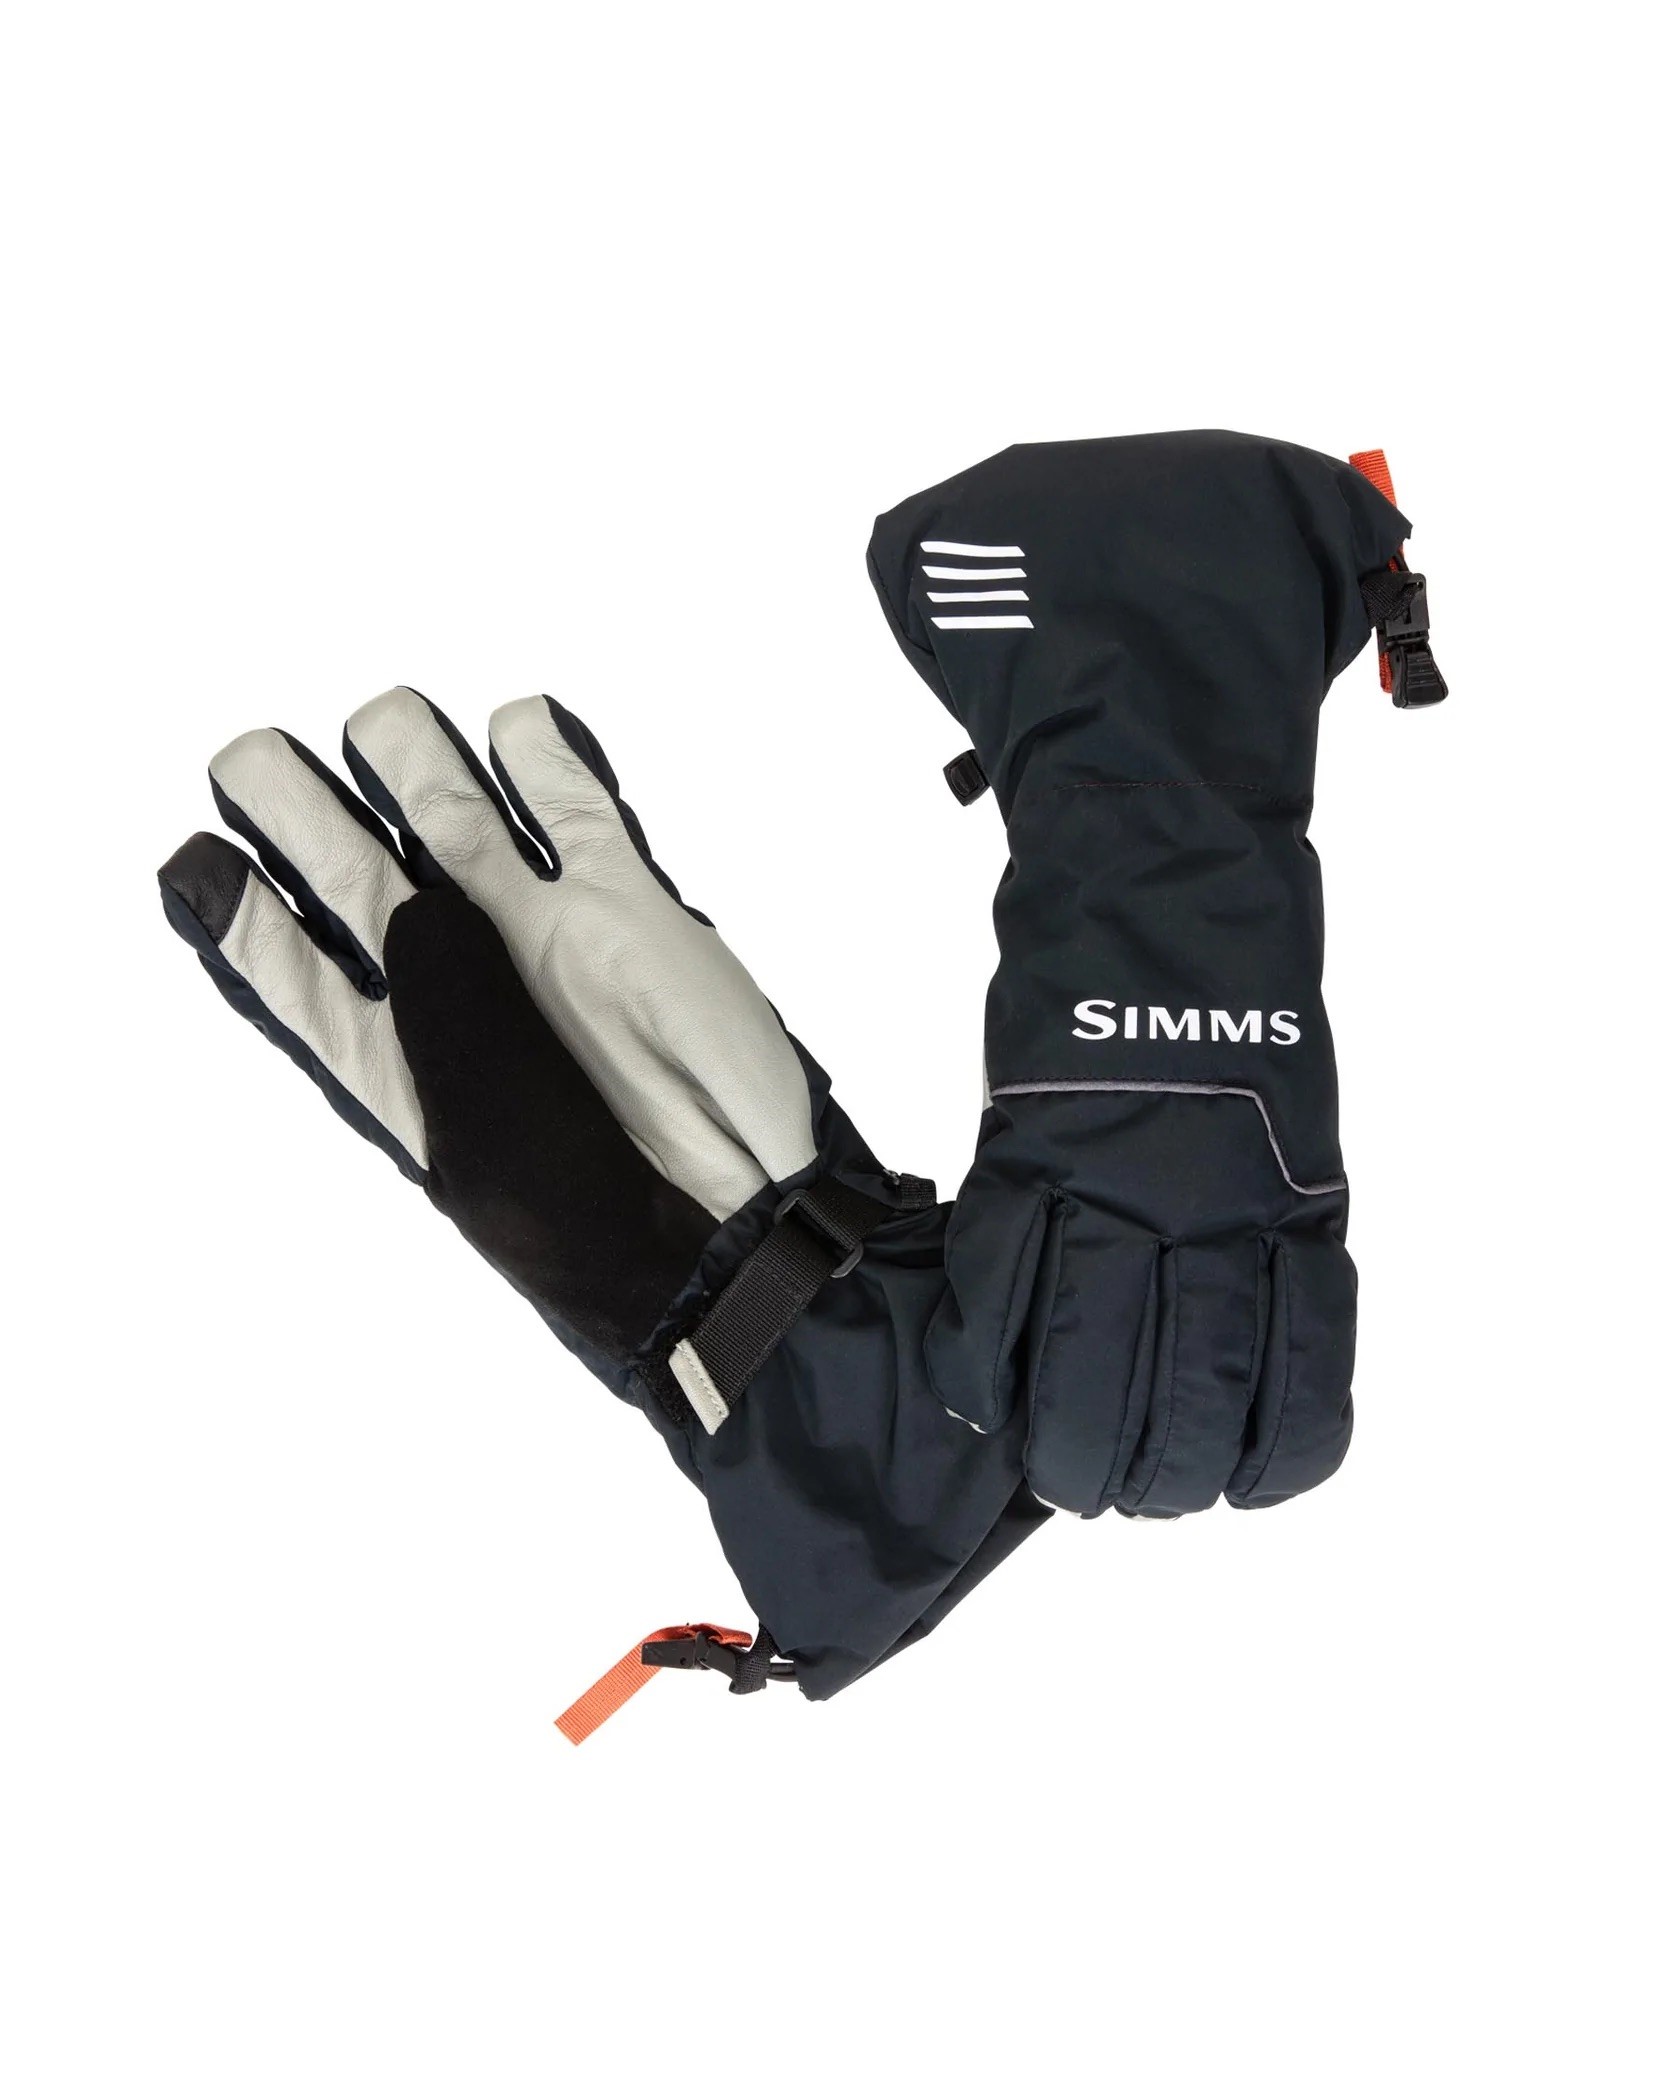 Simms Challenger Insulated Glove - Black - Large